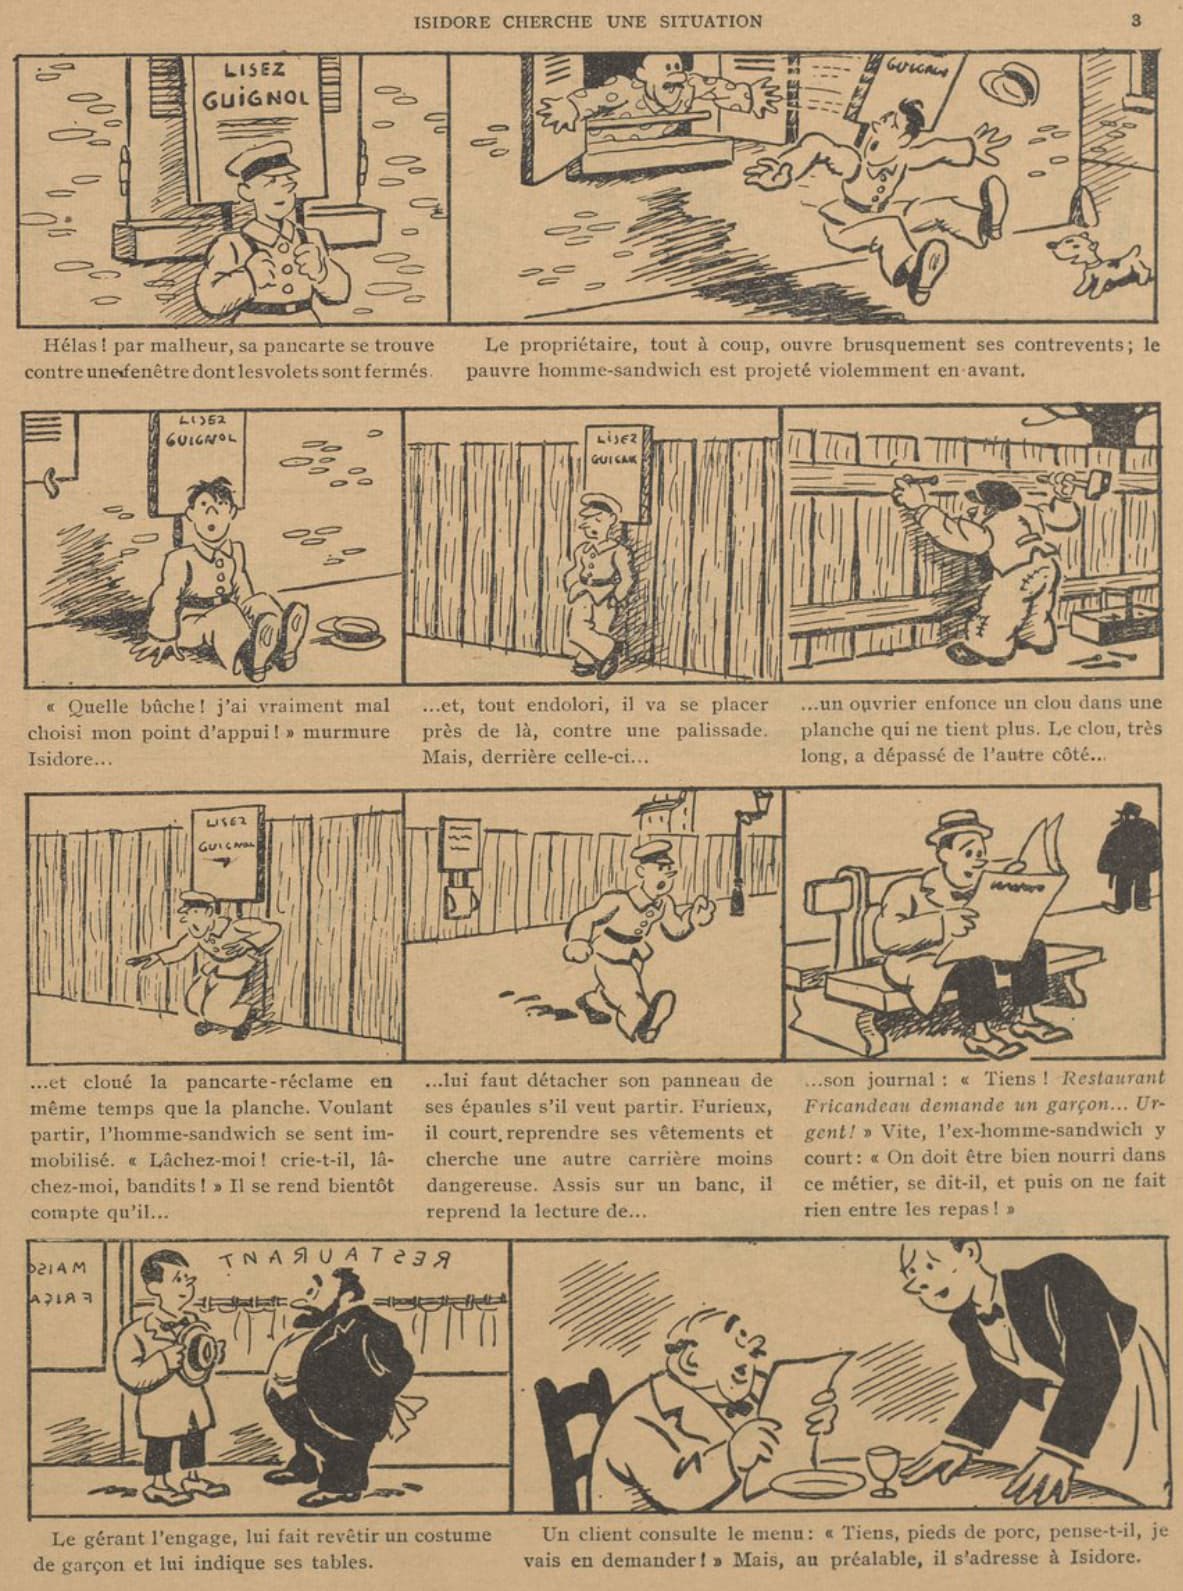 Guignol 1932 - n°190 - Isidore cherche une situation - 3 avril 1932 - page 3